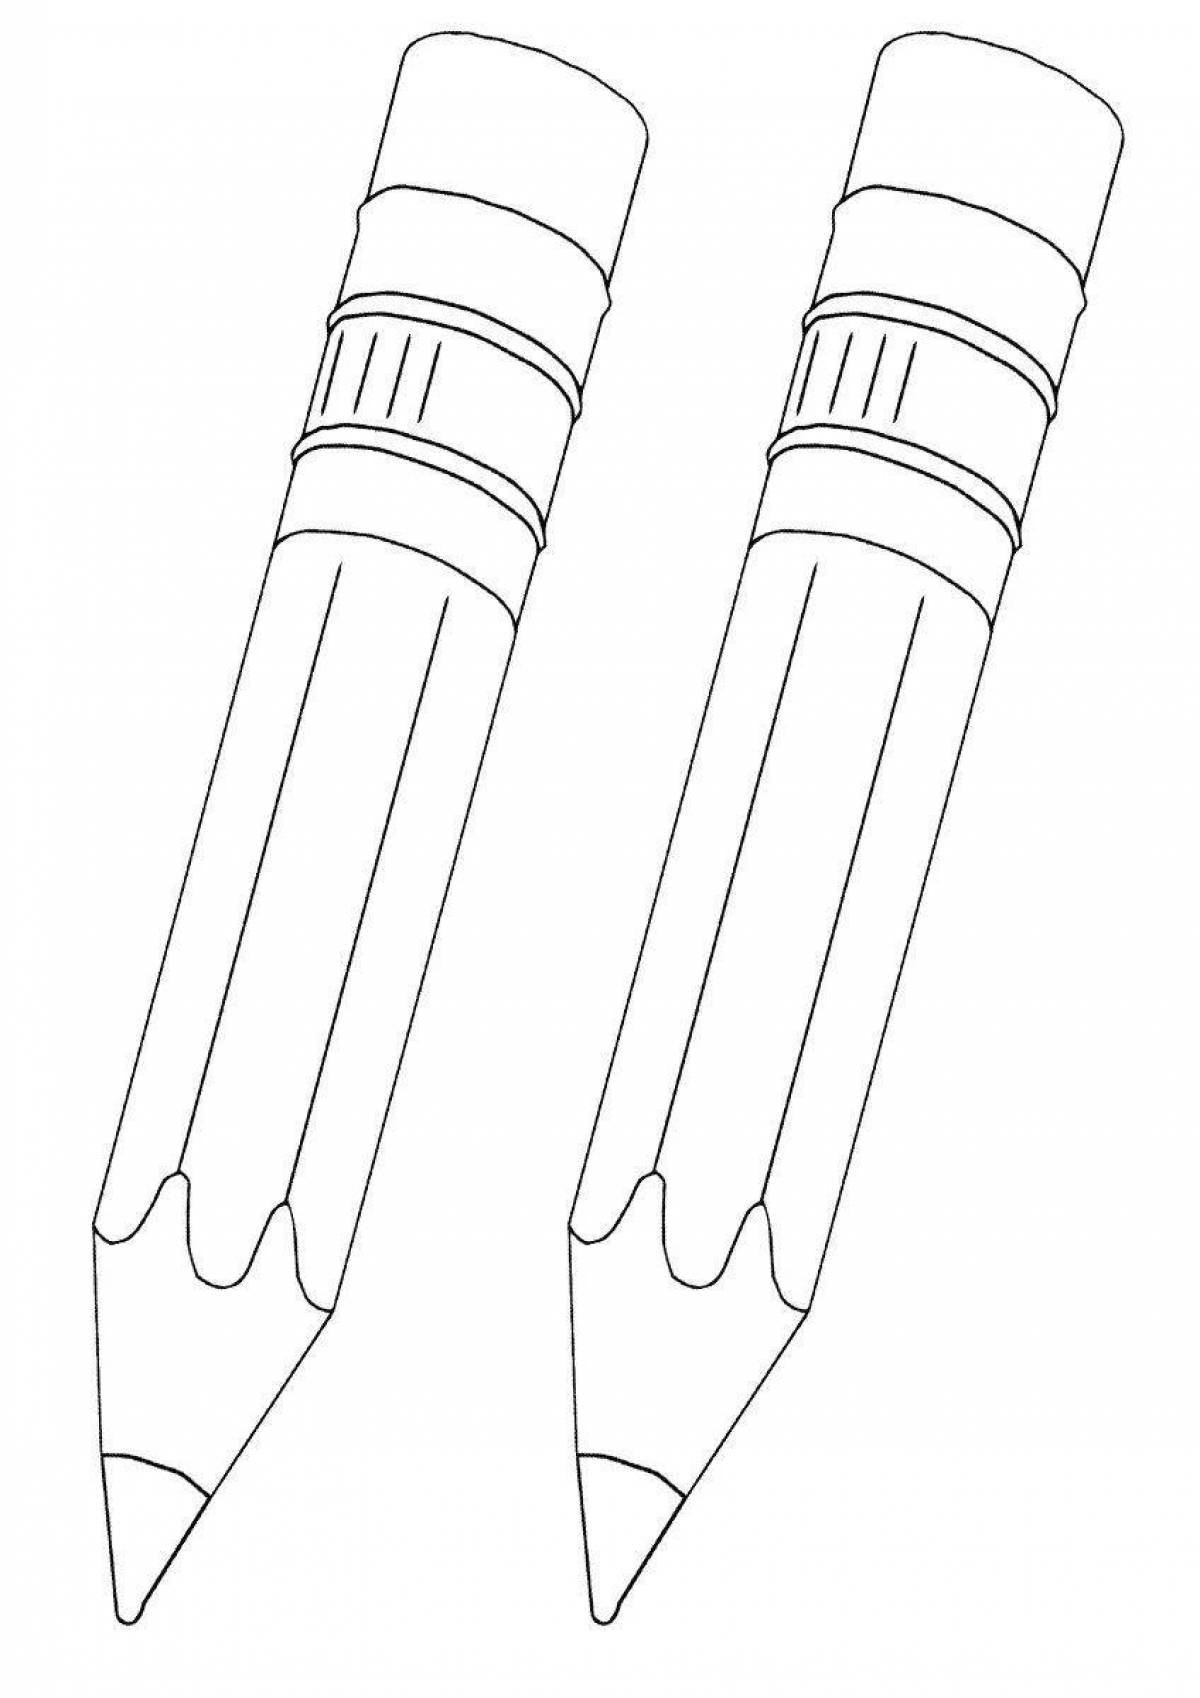 2 pencil charm coloring page